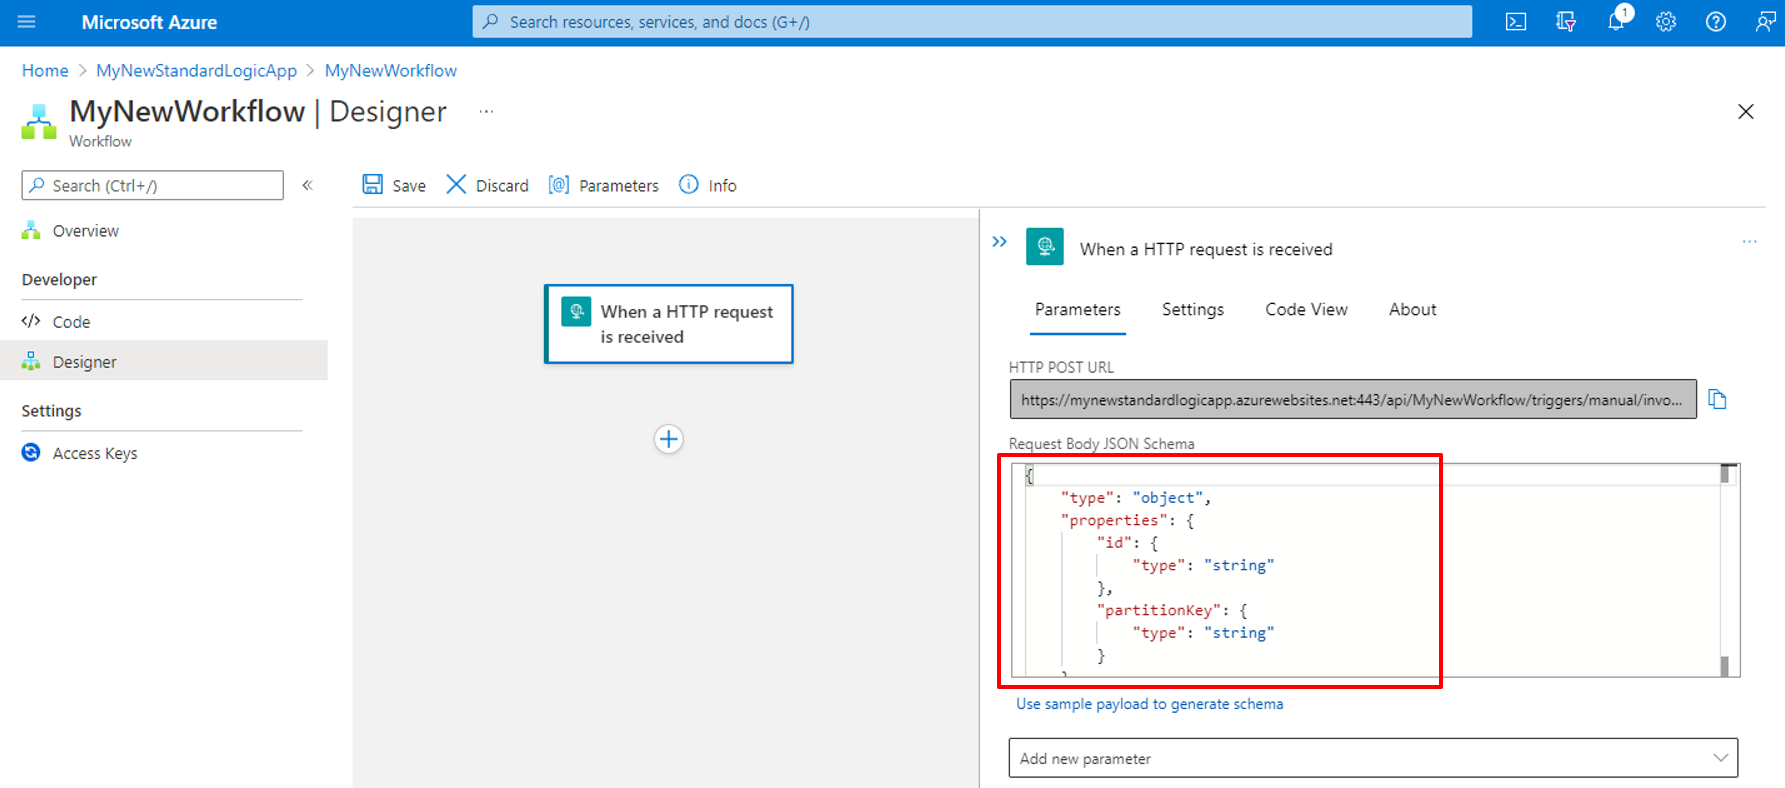 Screenshot showing the Azure portal and designer for a Standard logic app workflow with the 'When a HTTP request is received' trigger and parameters configuration.